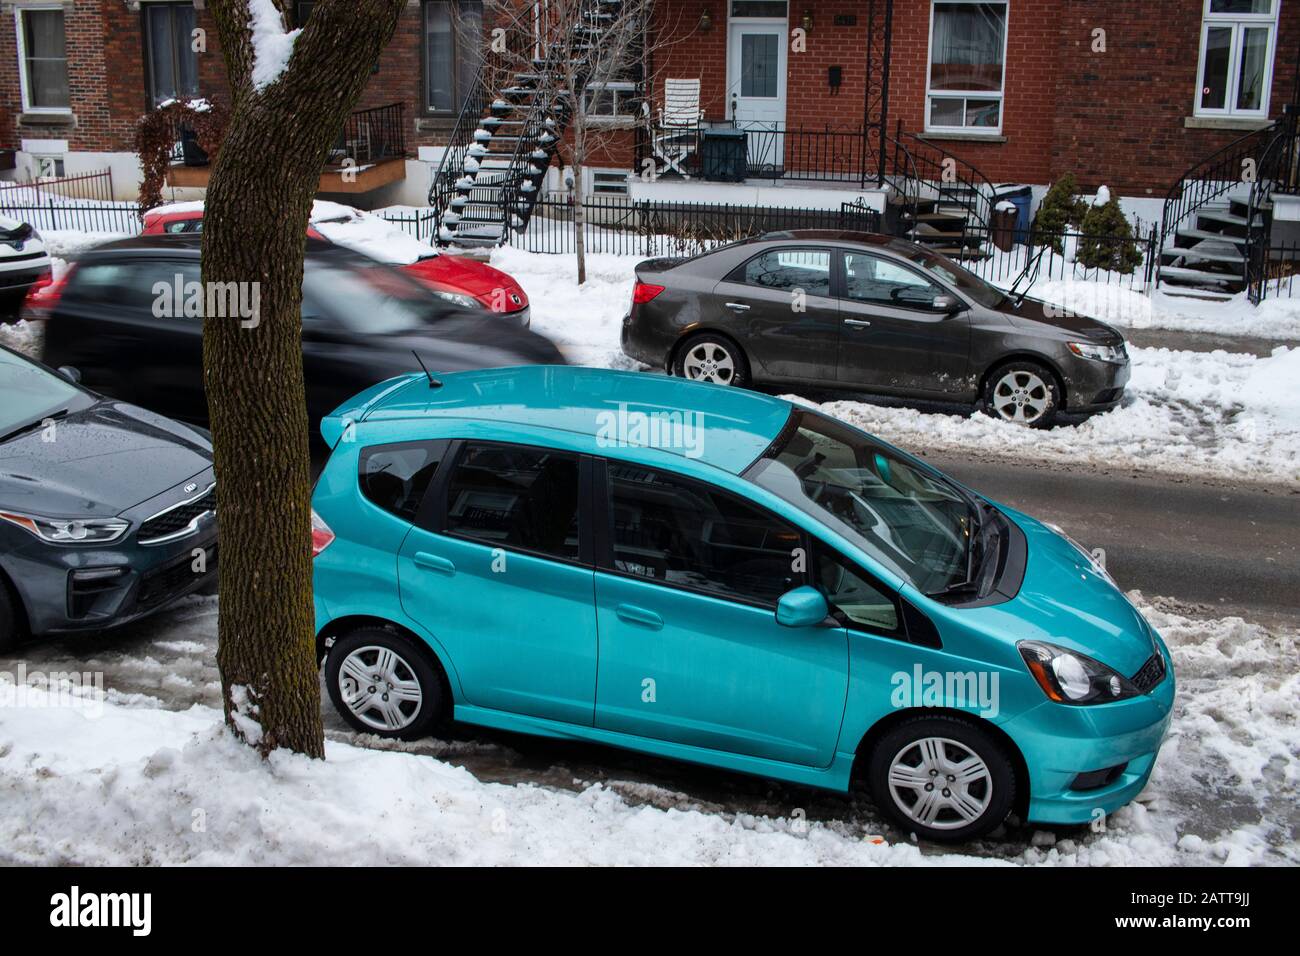 January 26, 2020 - Rosemont, Montreal, Quebec, Canada: Turquoise car and cars parked along sideways on a residential street during day winter Stock Photo